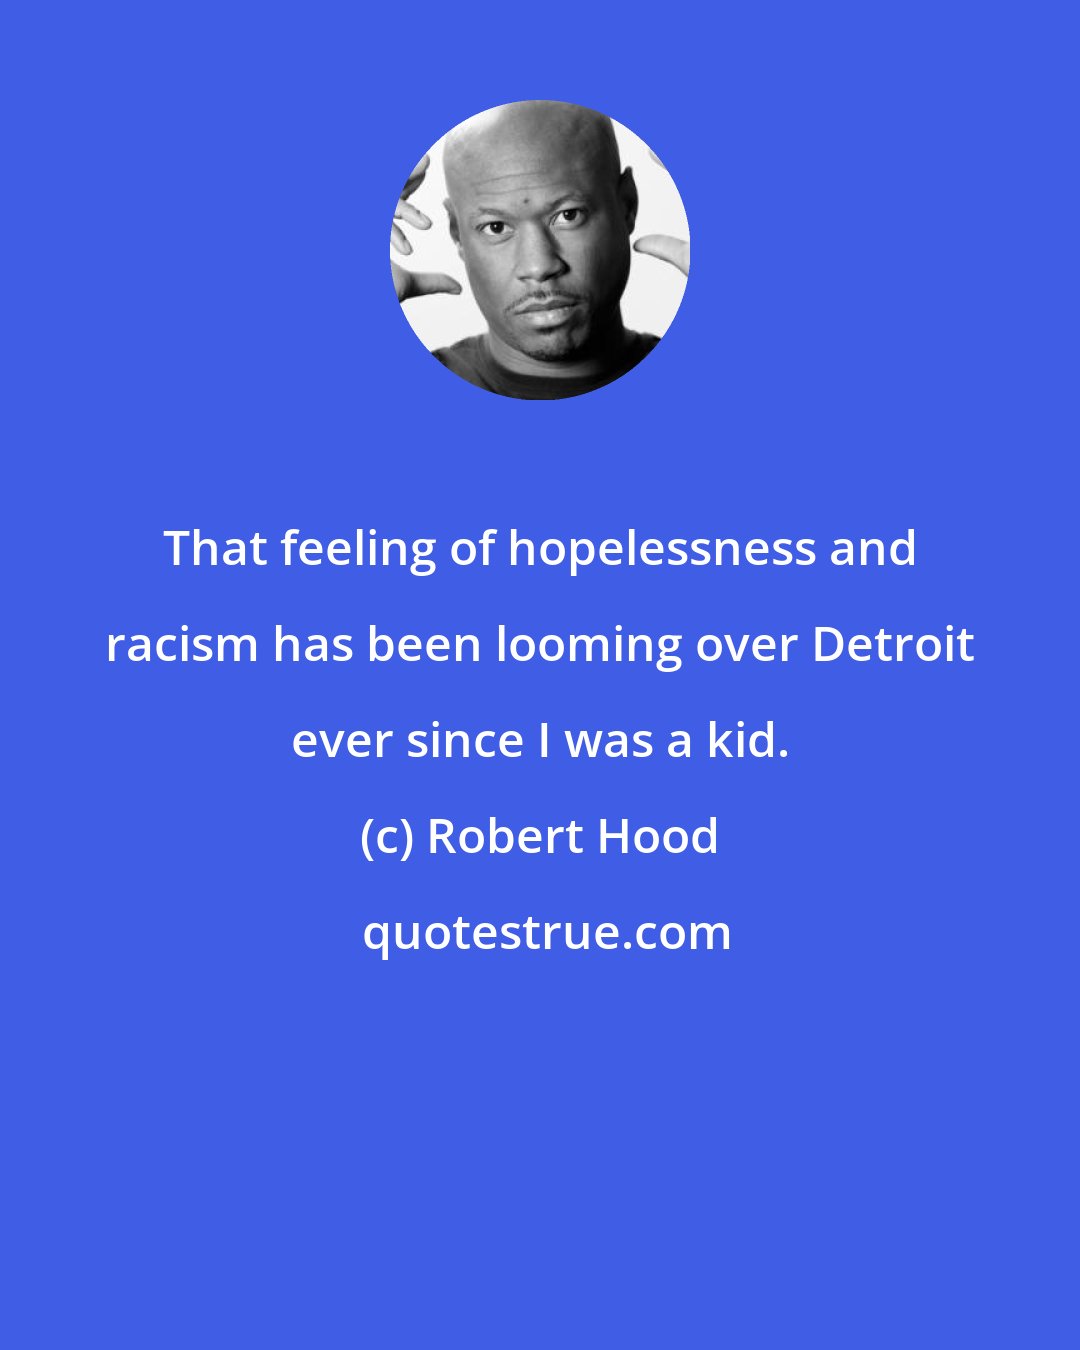 Robert Hood: That feeling of hopelessness and racism has been looming over Detroit ever since I was a kid.